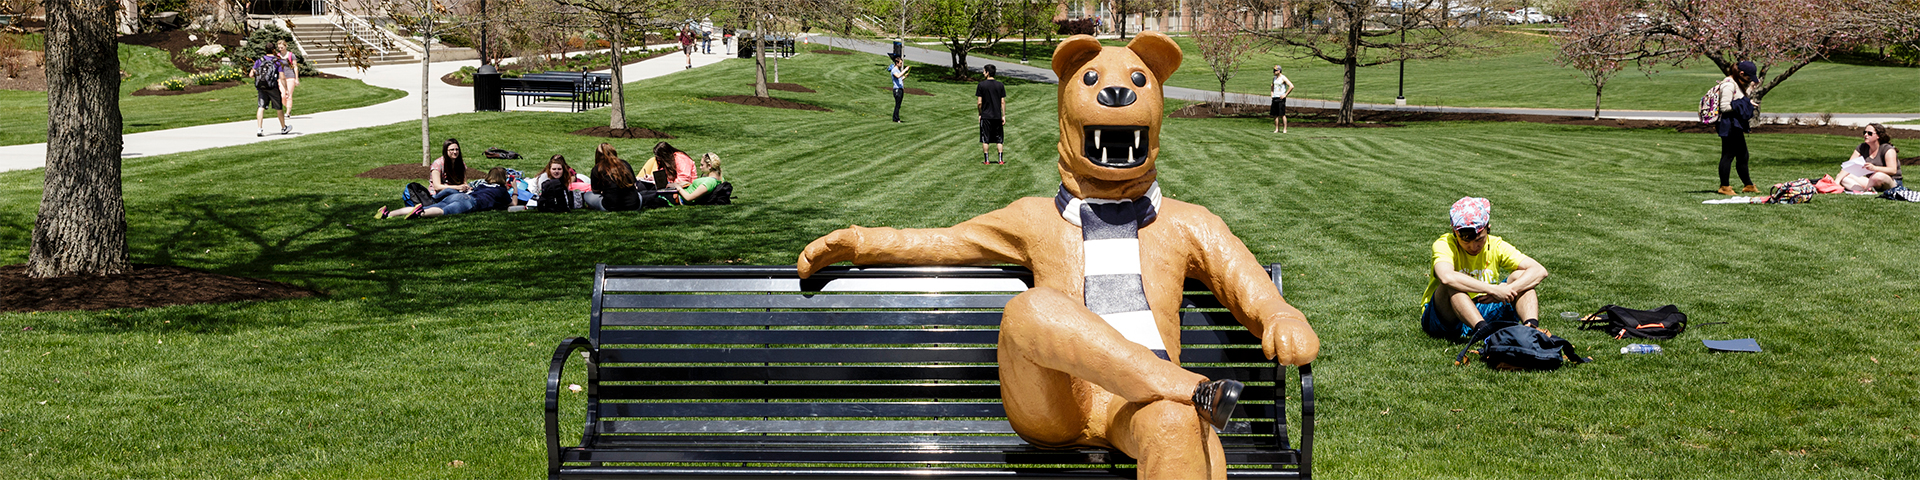 Penn State Berks Lion Bench with students sitting in the grass